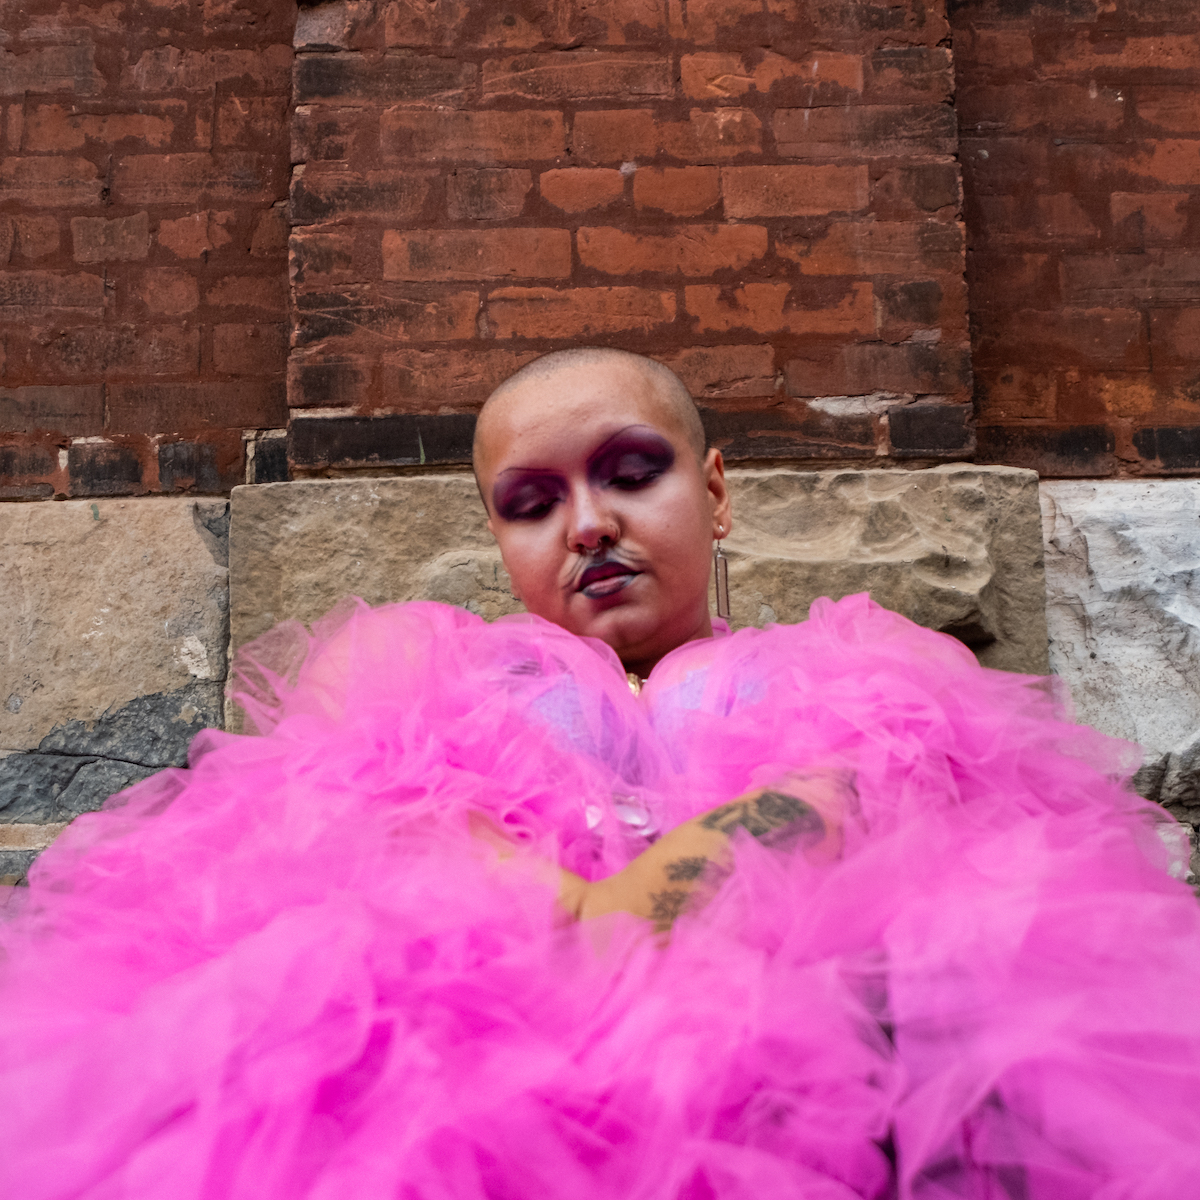 Photo of Sebastian Urmom - they have a shaved head and are wrapped in a pink crinoline. The background behind them is red bricks.